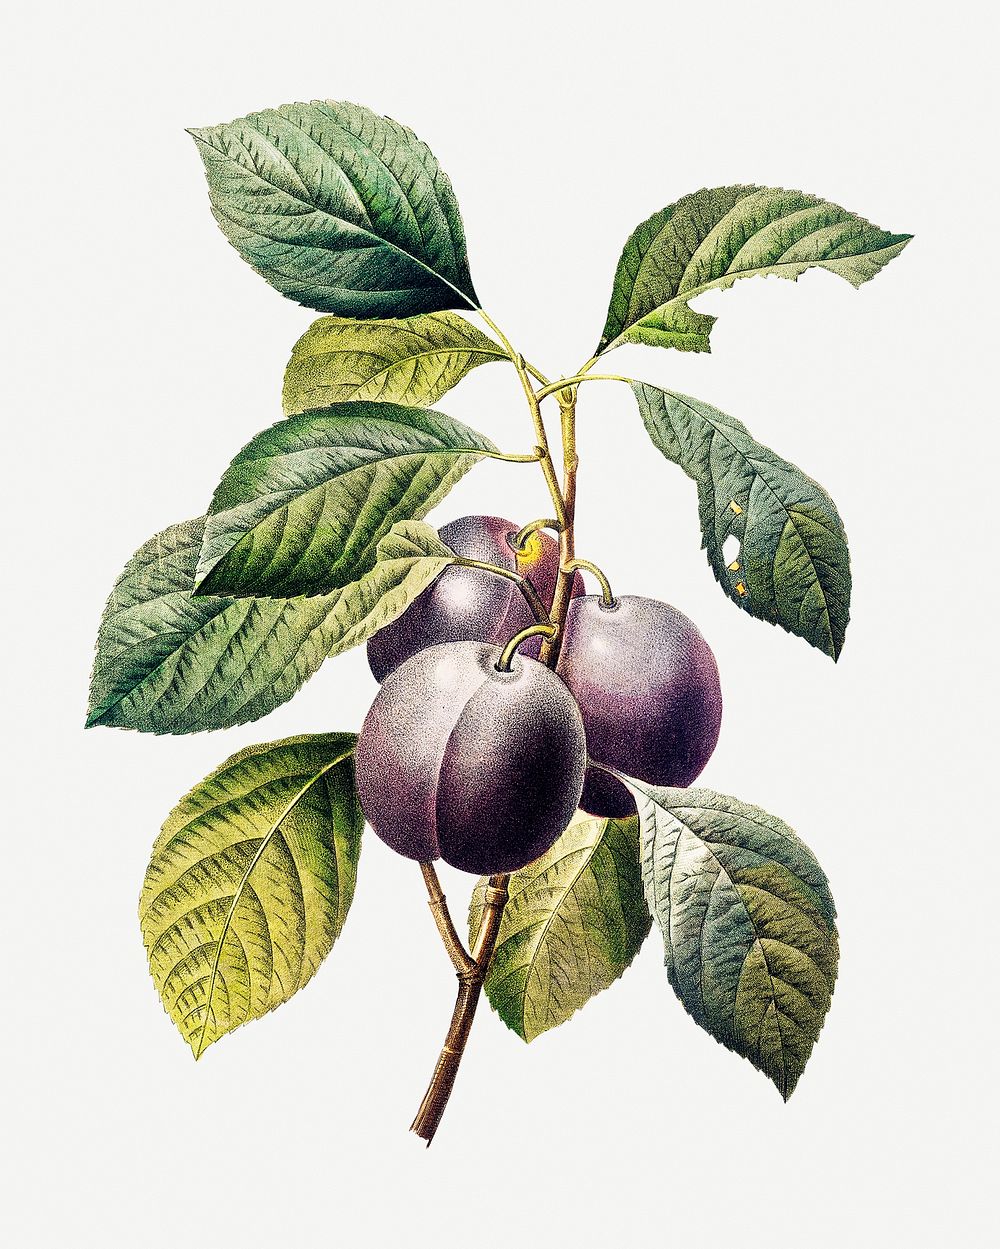 Plum fruit psd botanical illustration, remixed from artworks by Pierre-Joseph Redout&eacute;